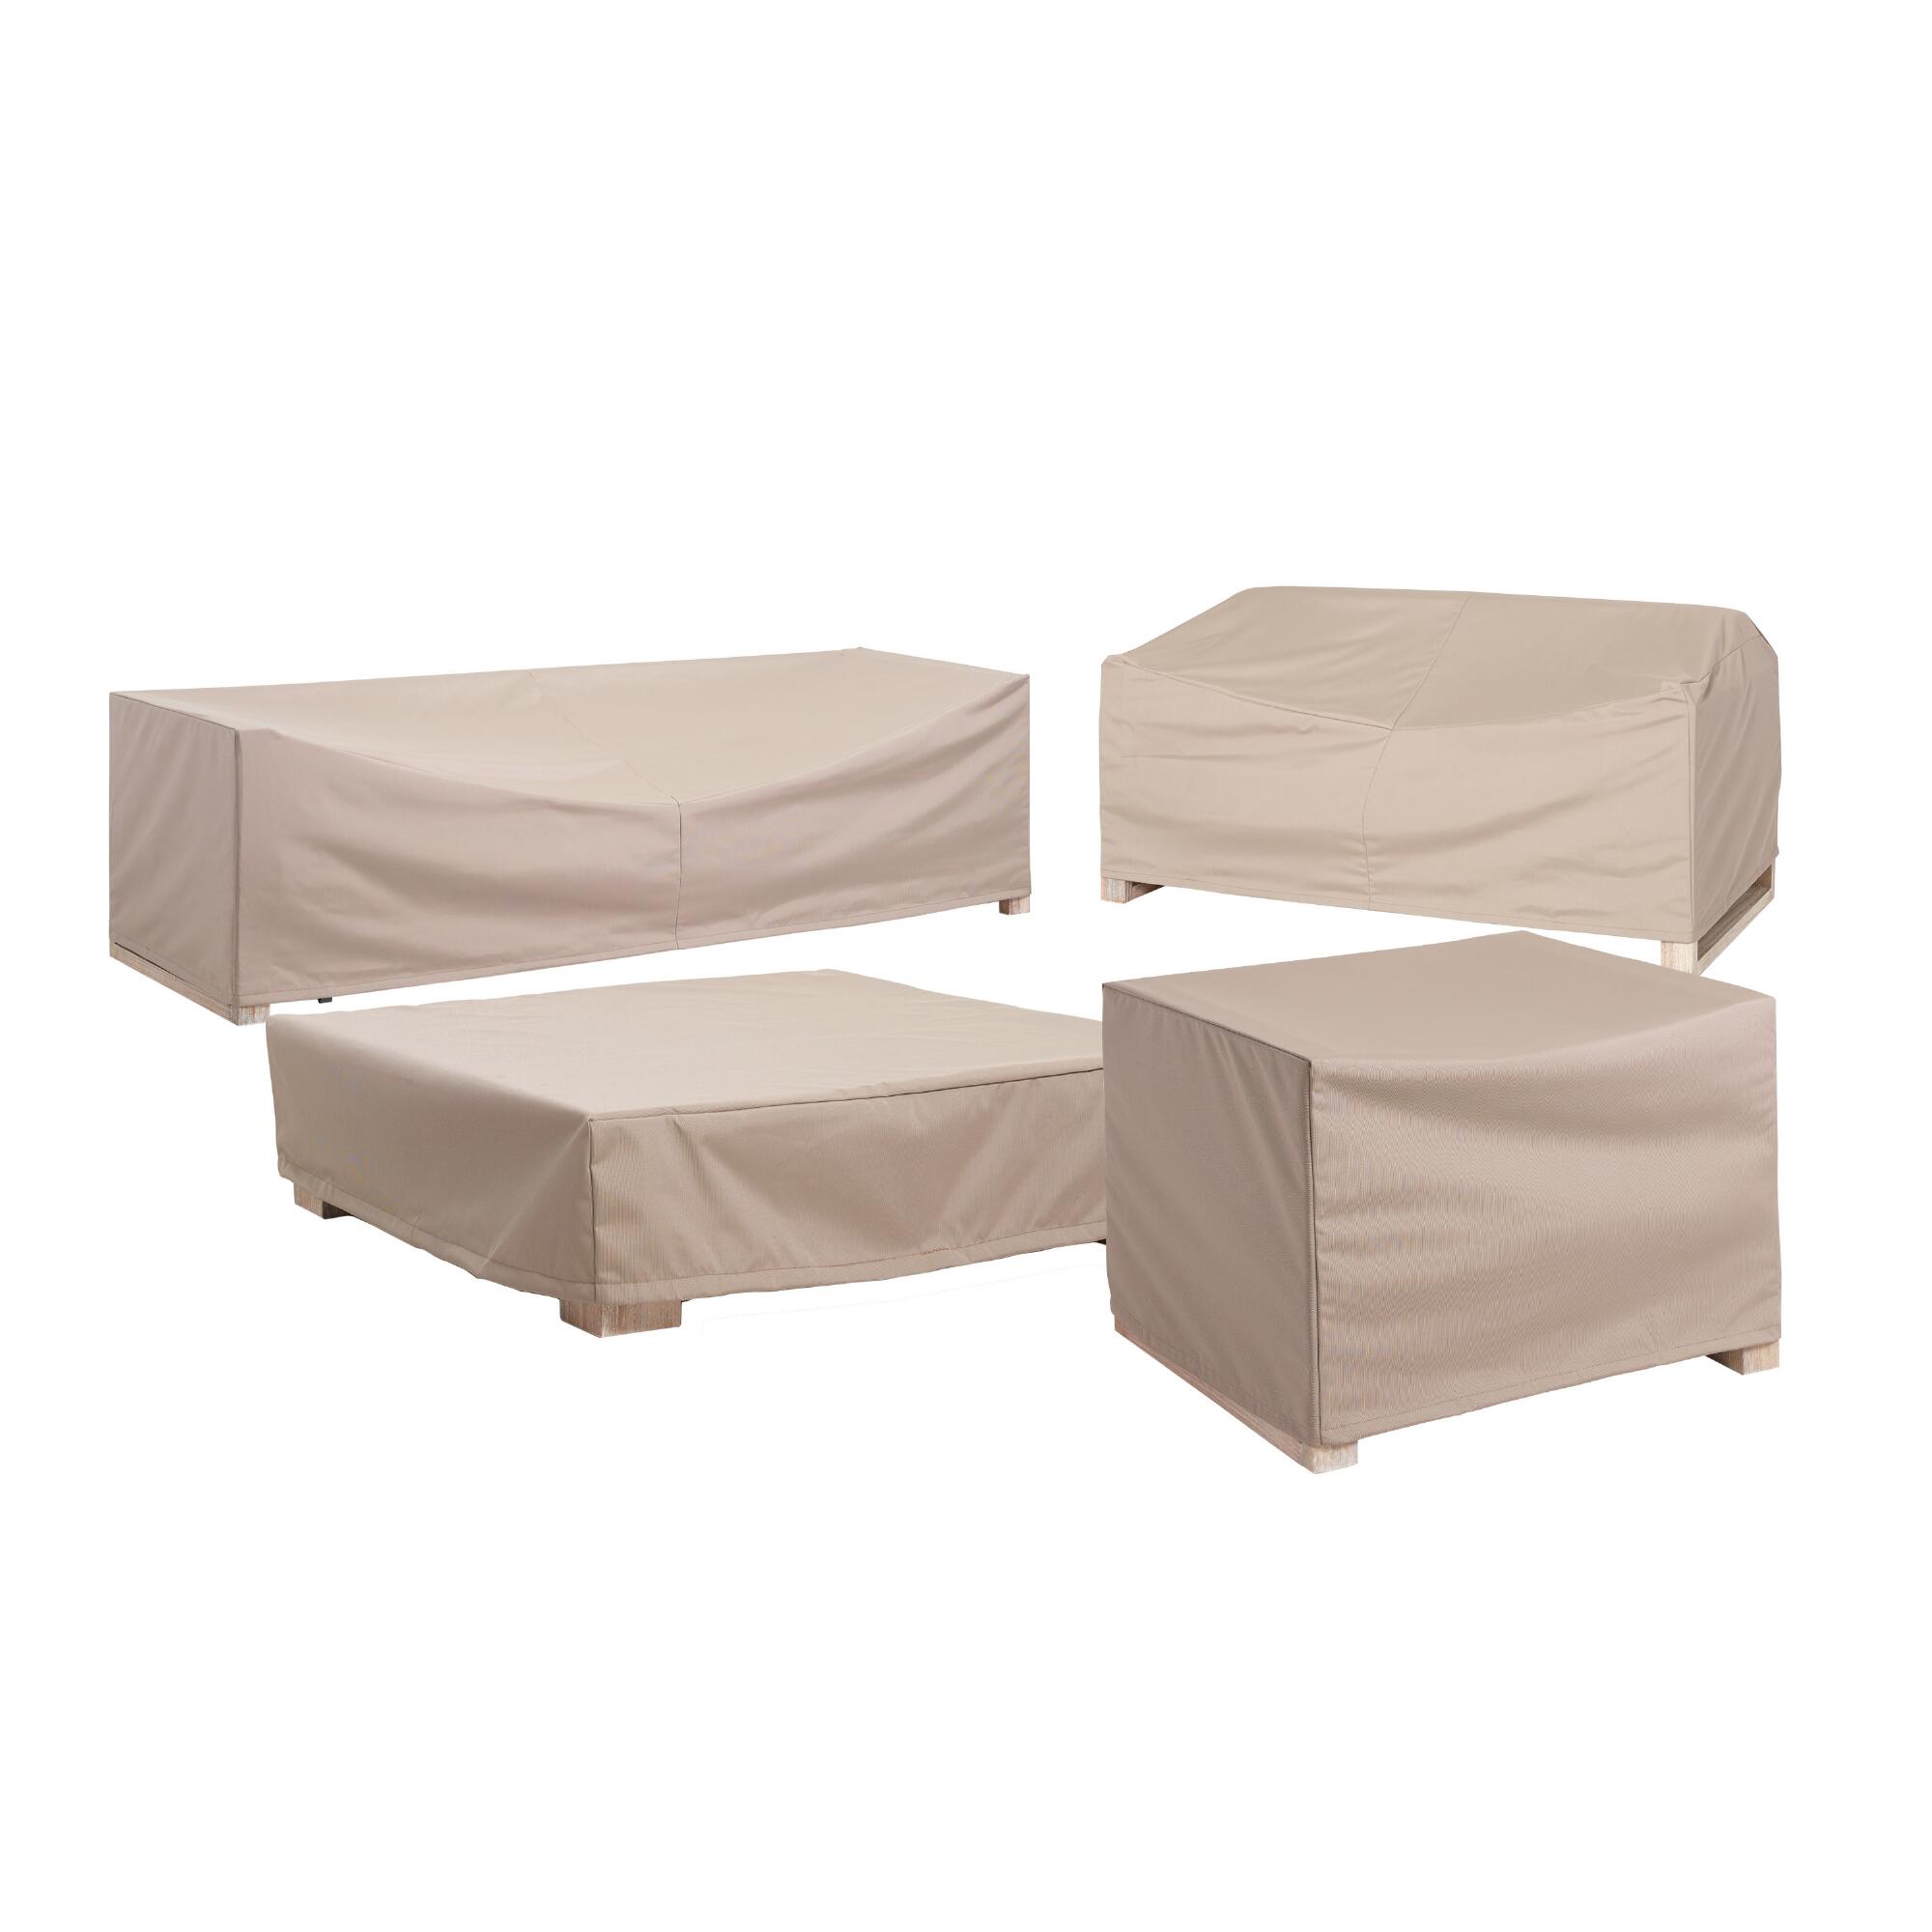 Segovia Outdoor Patio Furniture Cover Collection by World Market